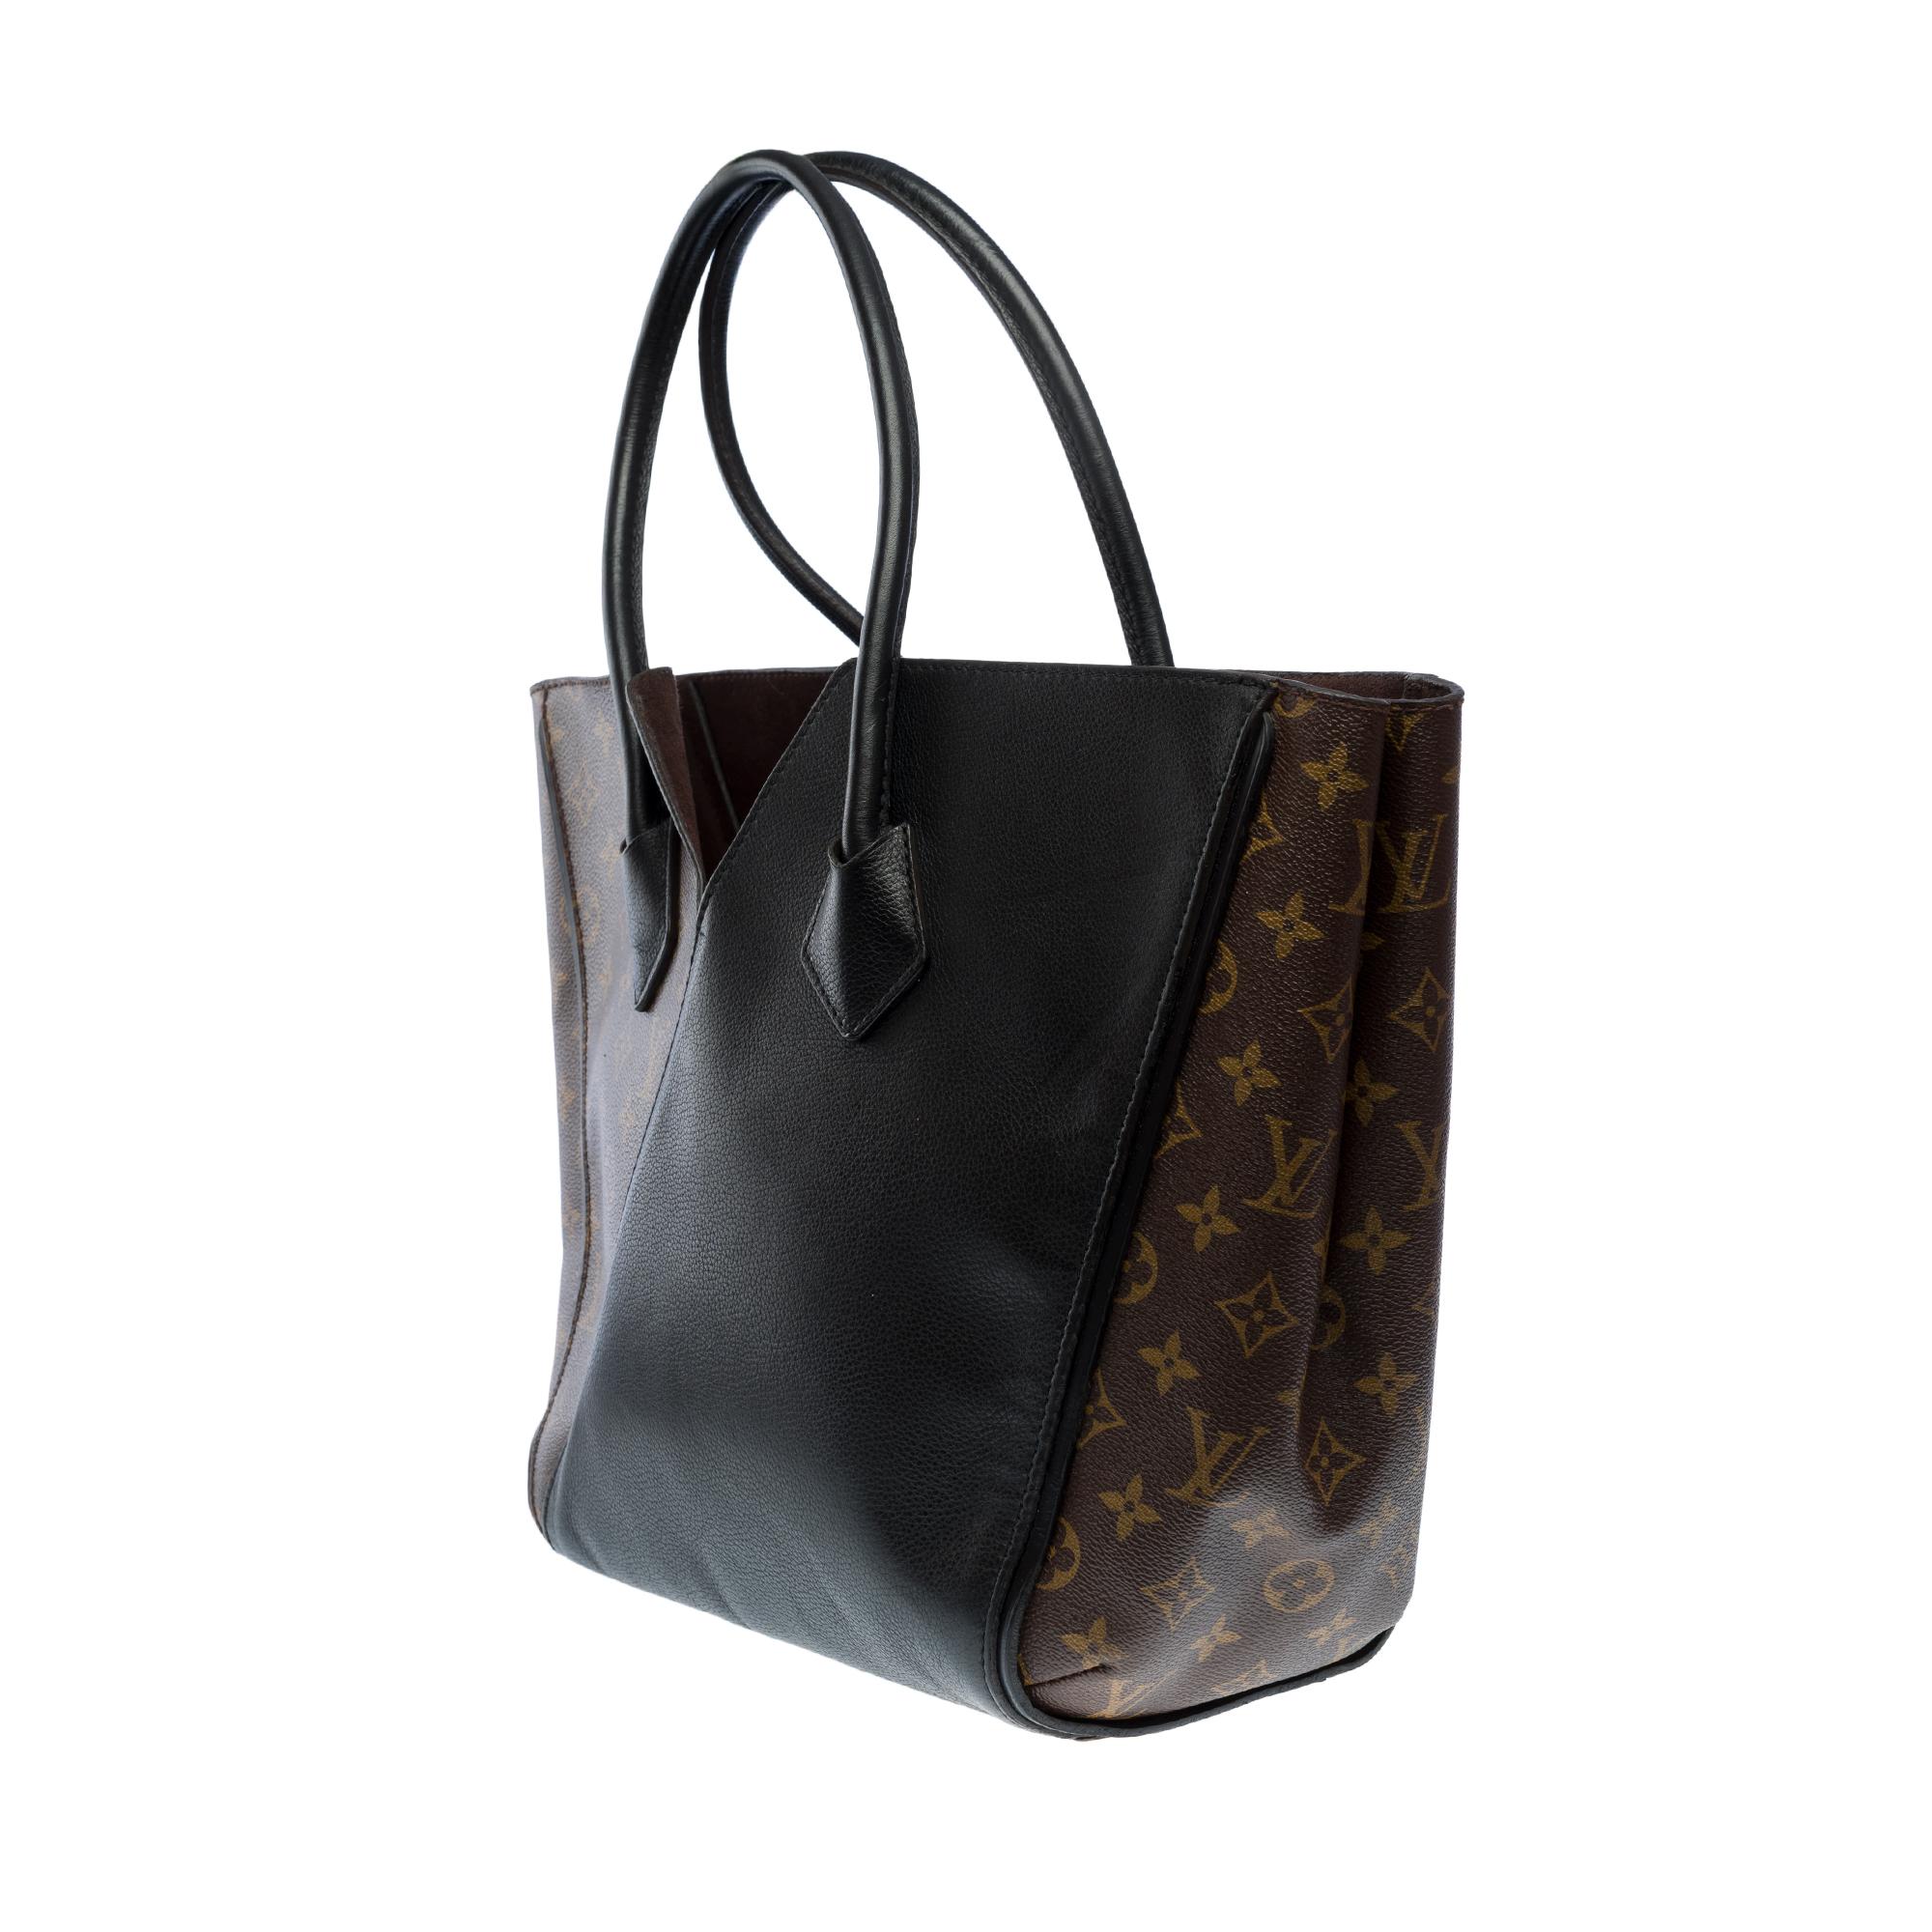 Louis Vuitton Kimono Tote bag in brown monogram canvas and black leather, GHW For Sale 1